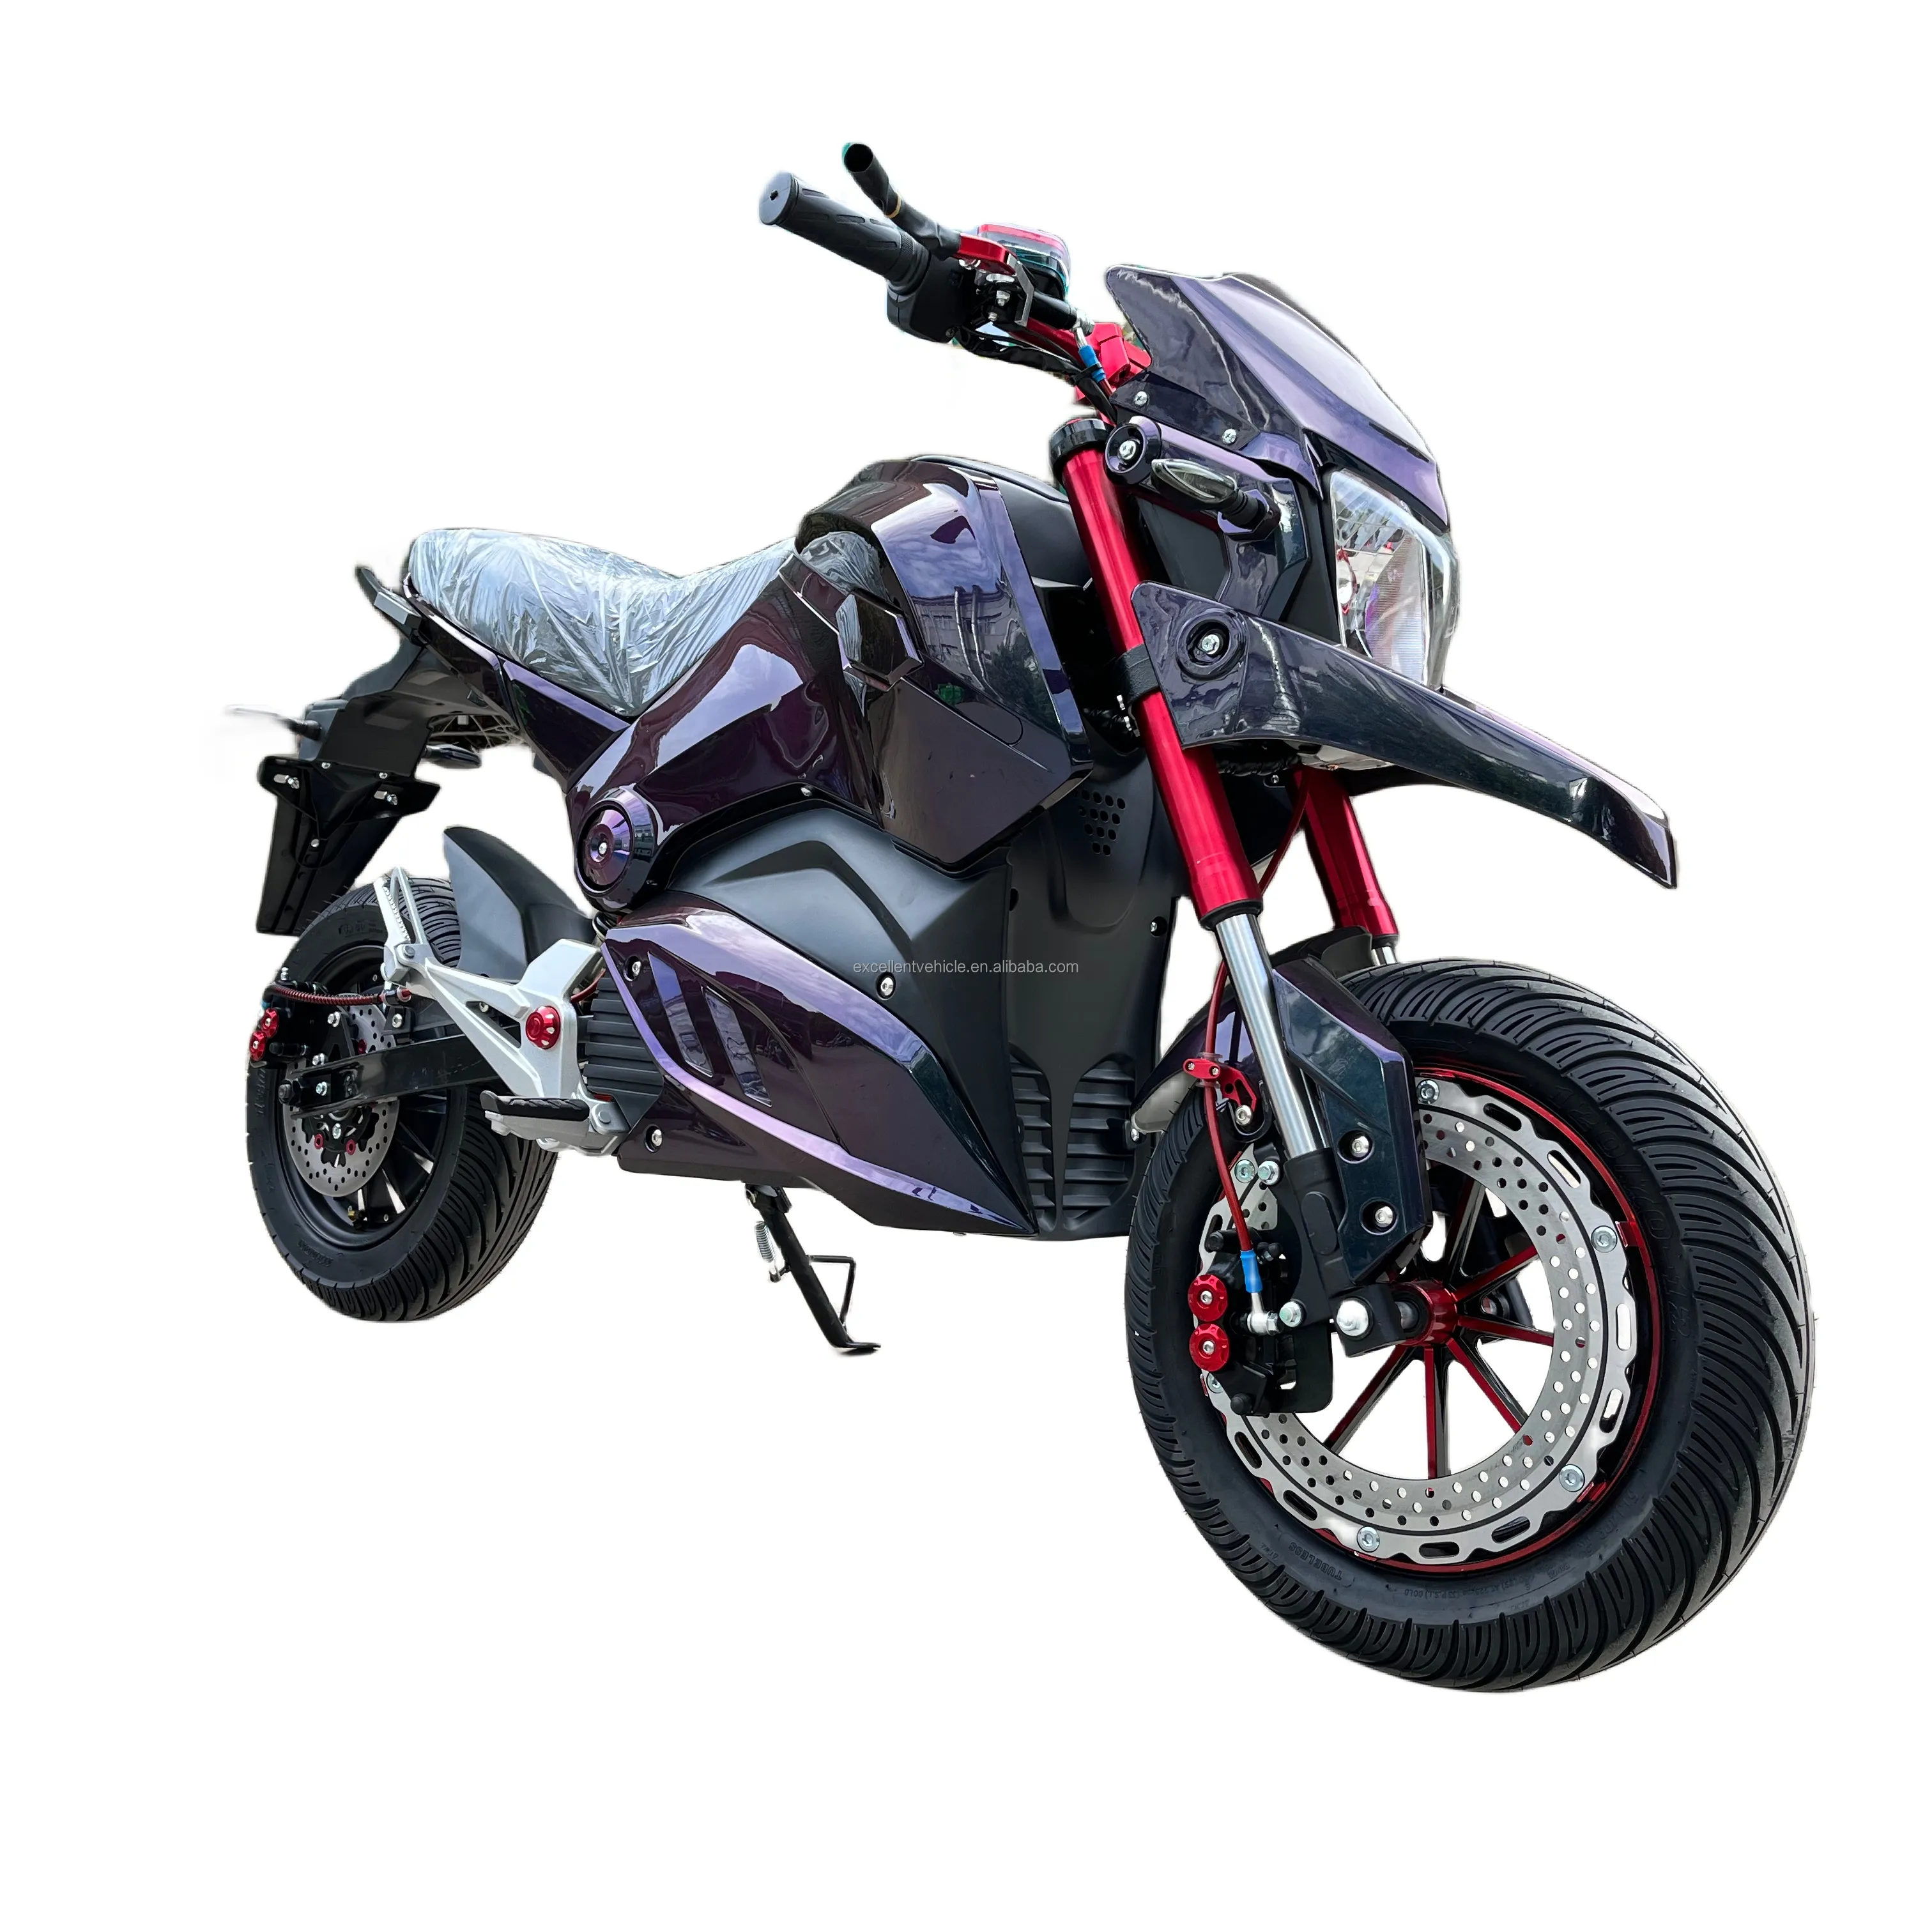 Super Power Adult Motorbike Sport Bike Off Road M3 Electric Motorcycle with 3000W motor